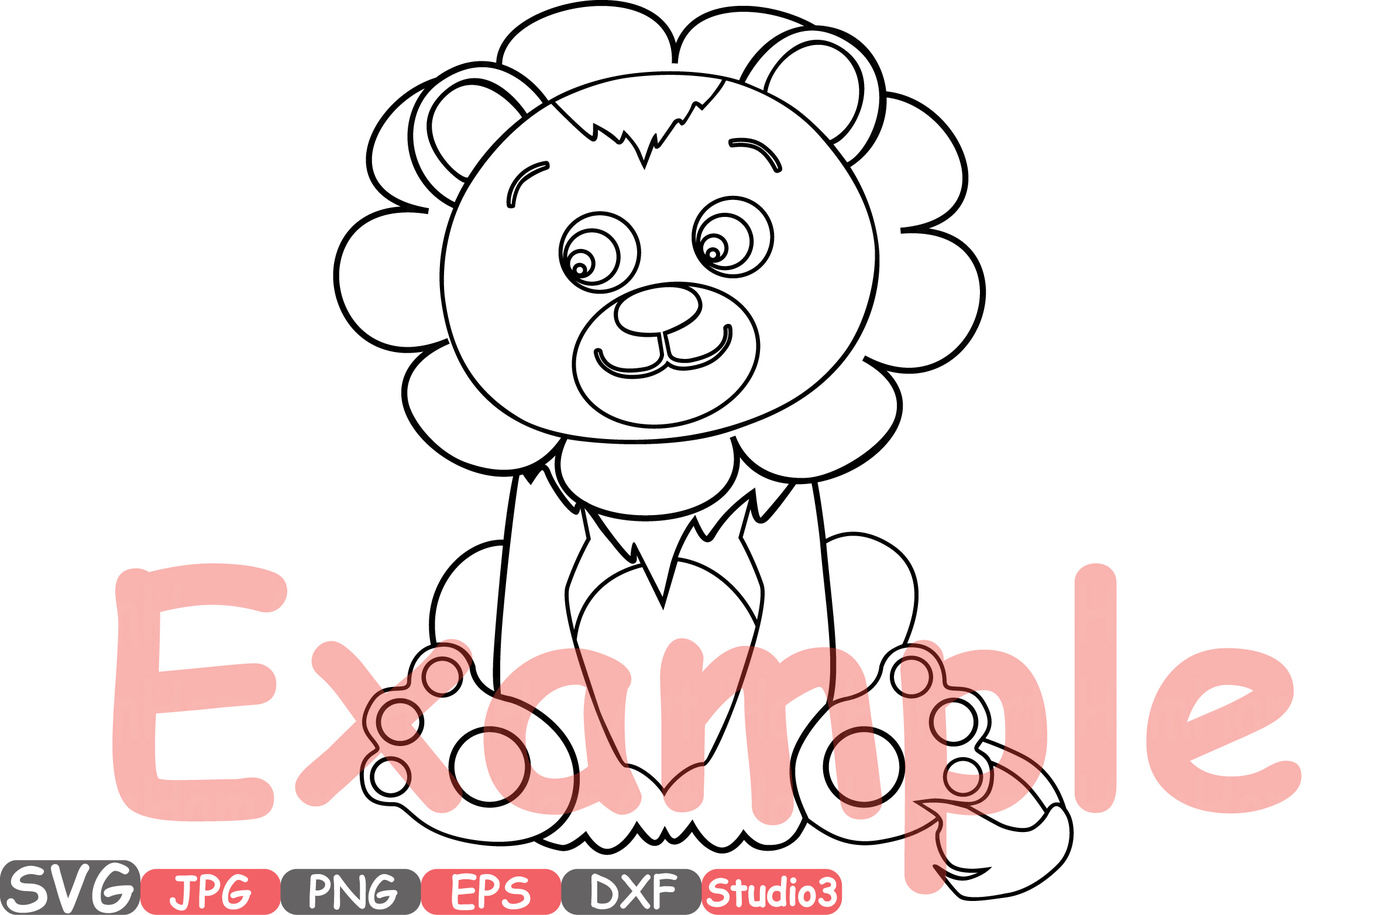 Baby Lion Silhouette Svg - Free Craft SVG files for personal use. Download them for free and ...